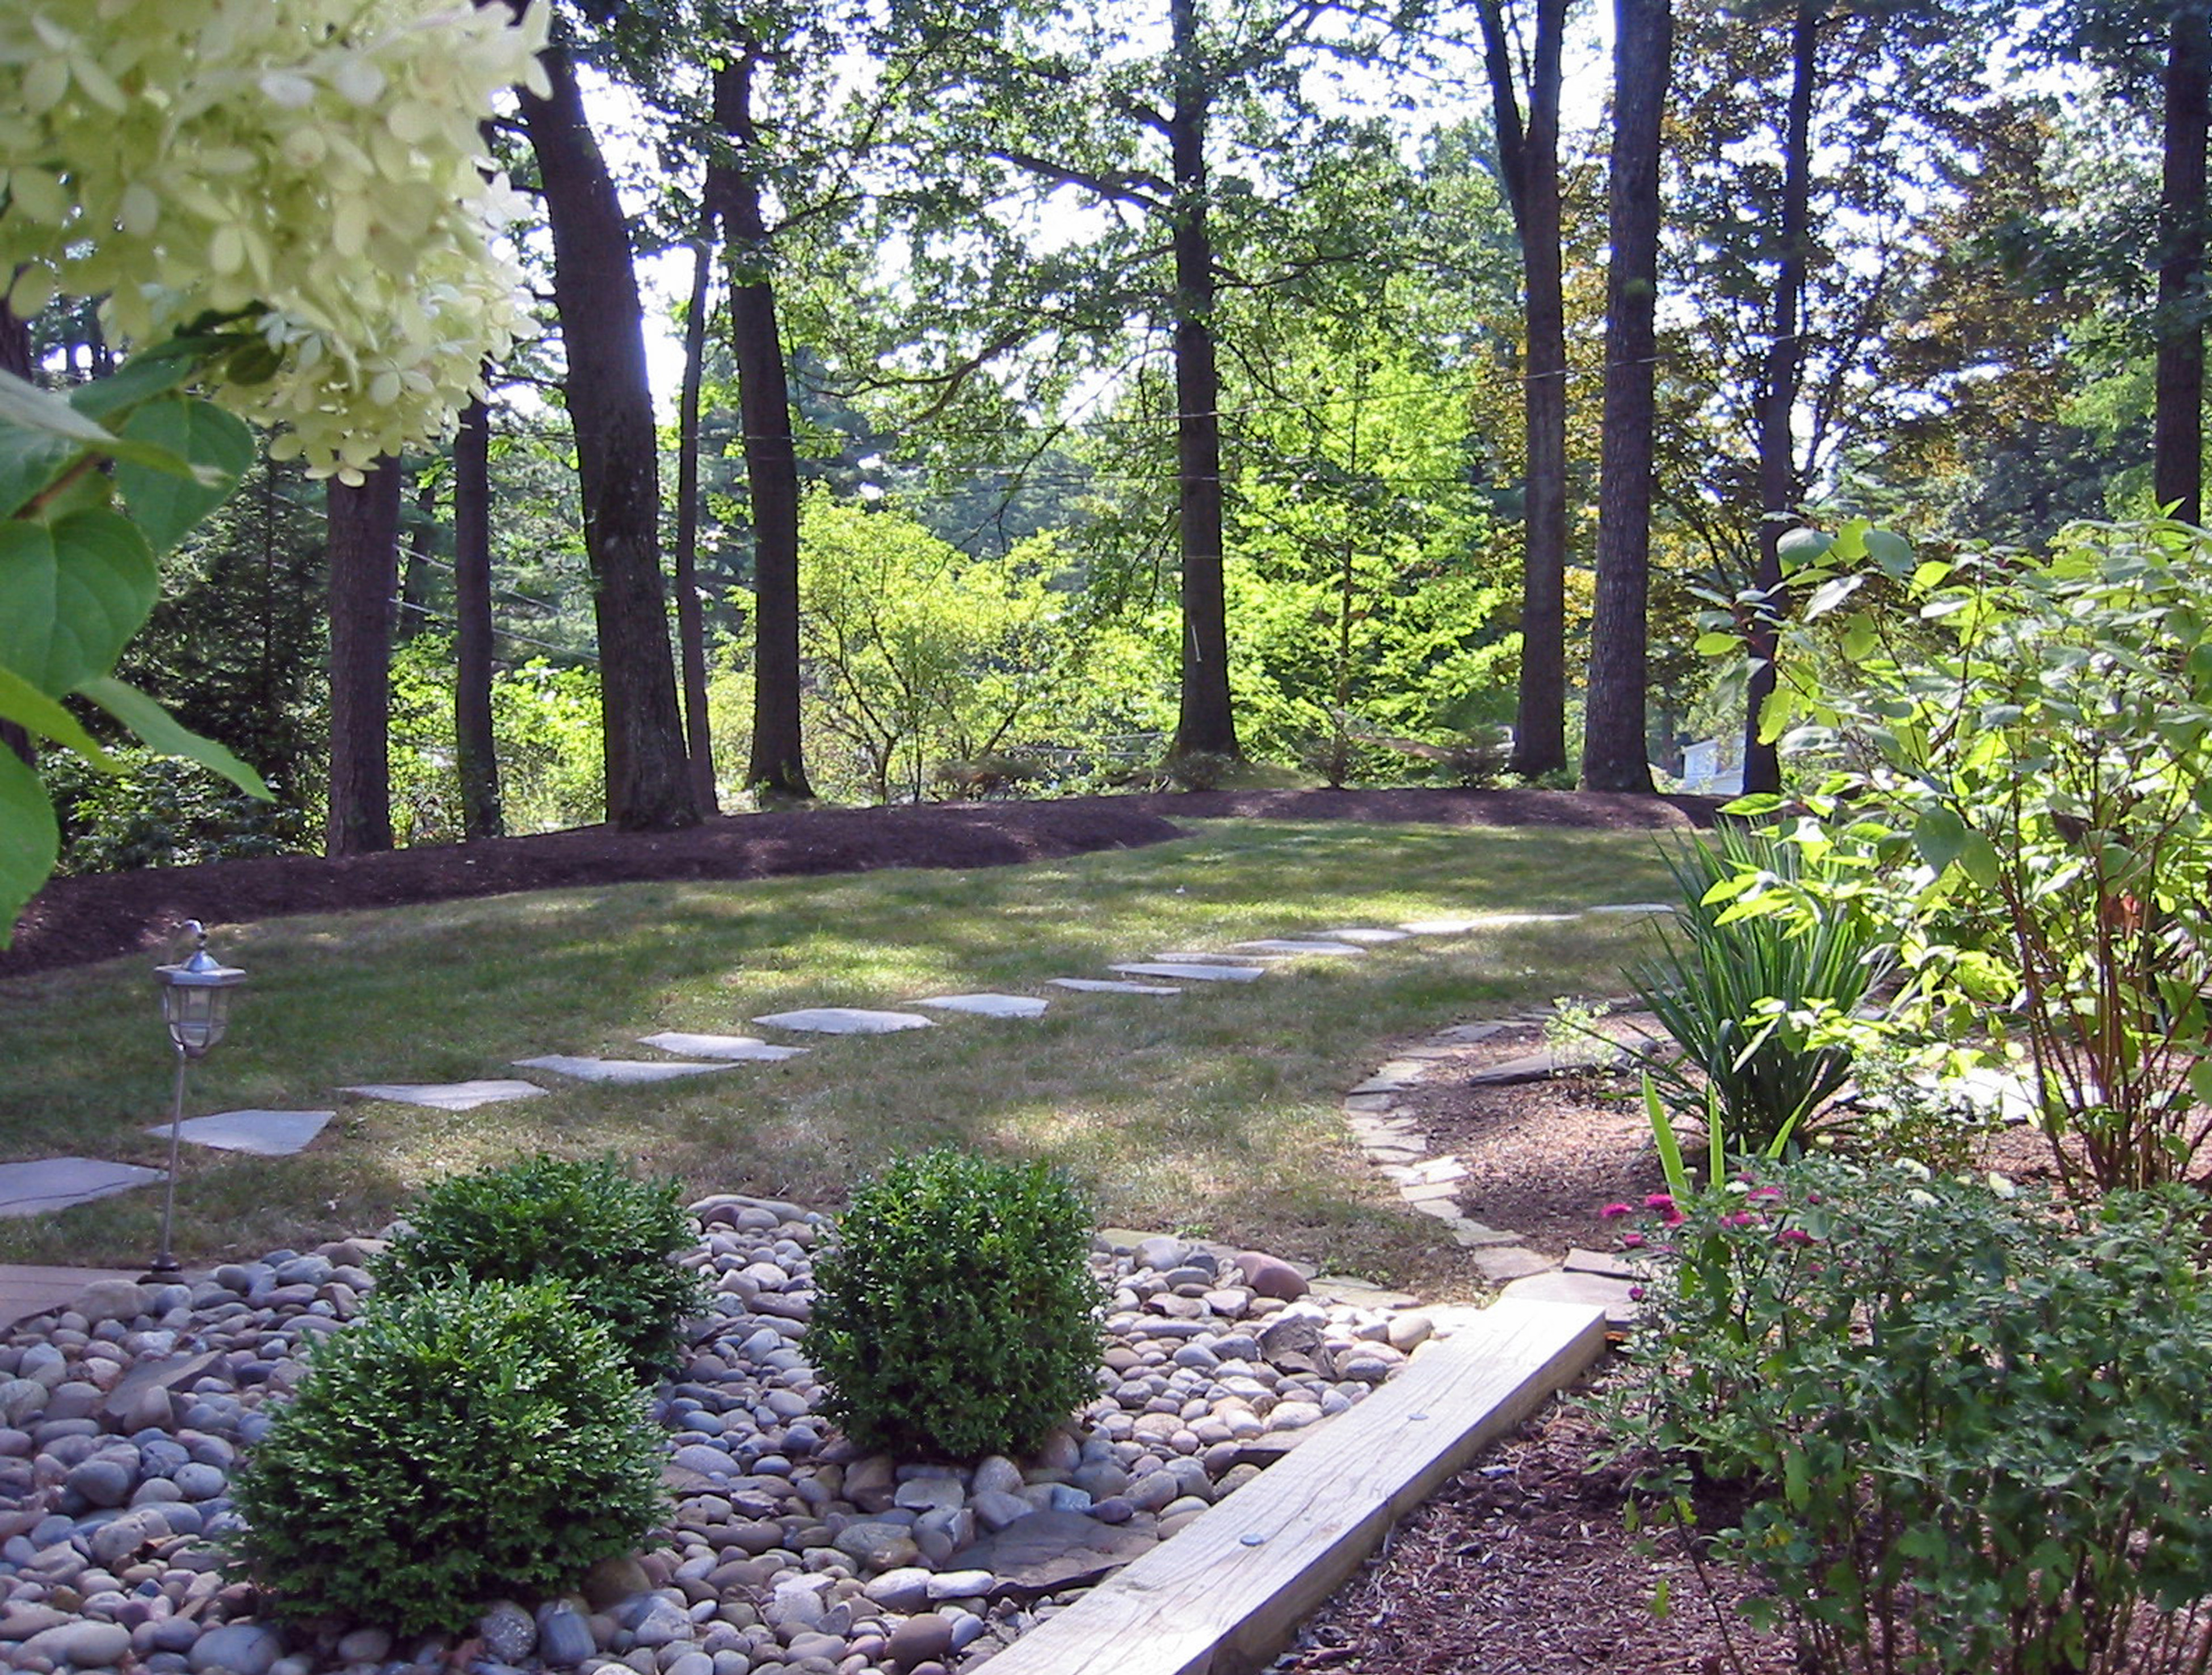 After image of front yard with new plant beds, stone, and stairways